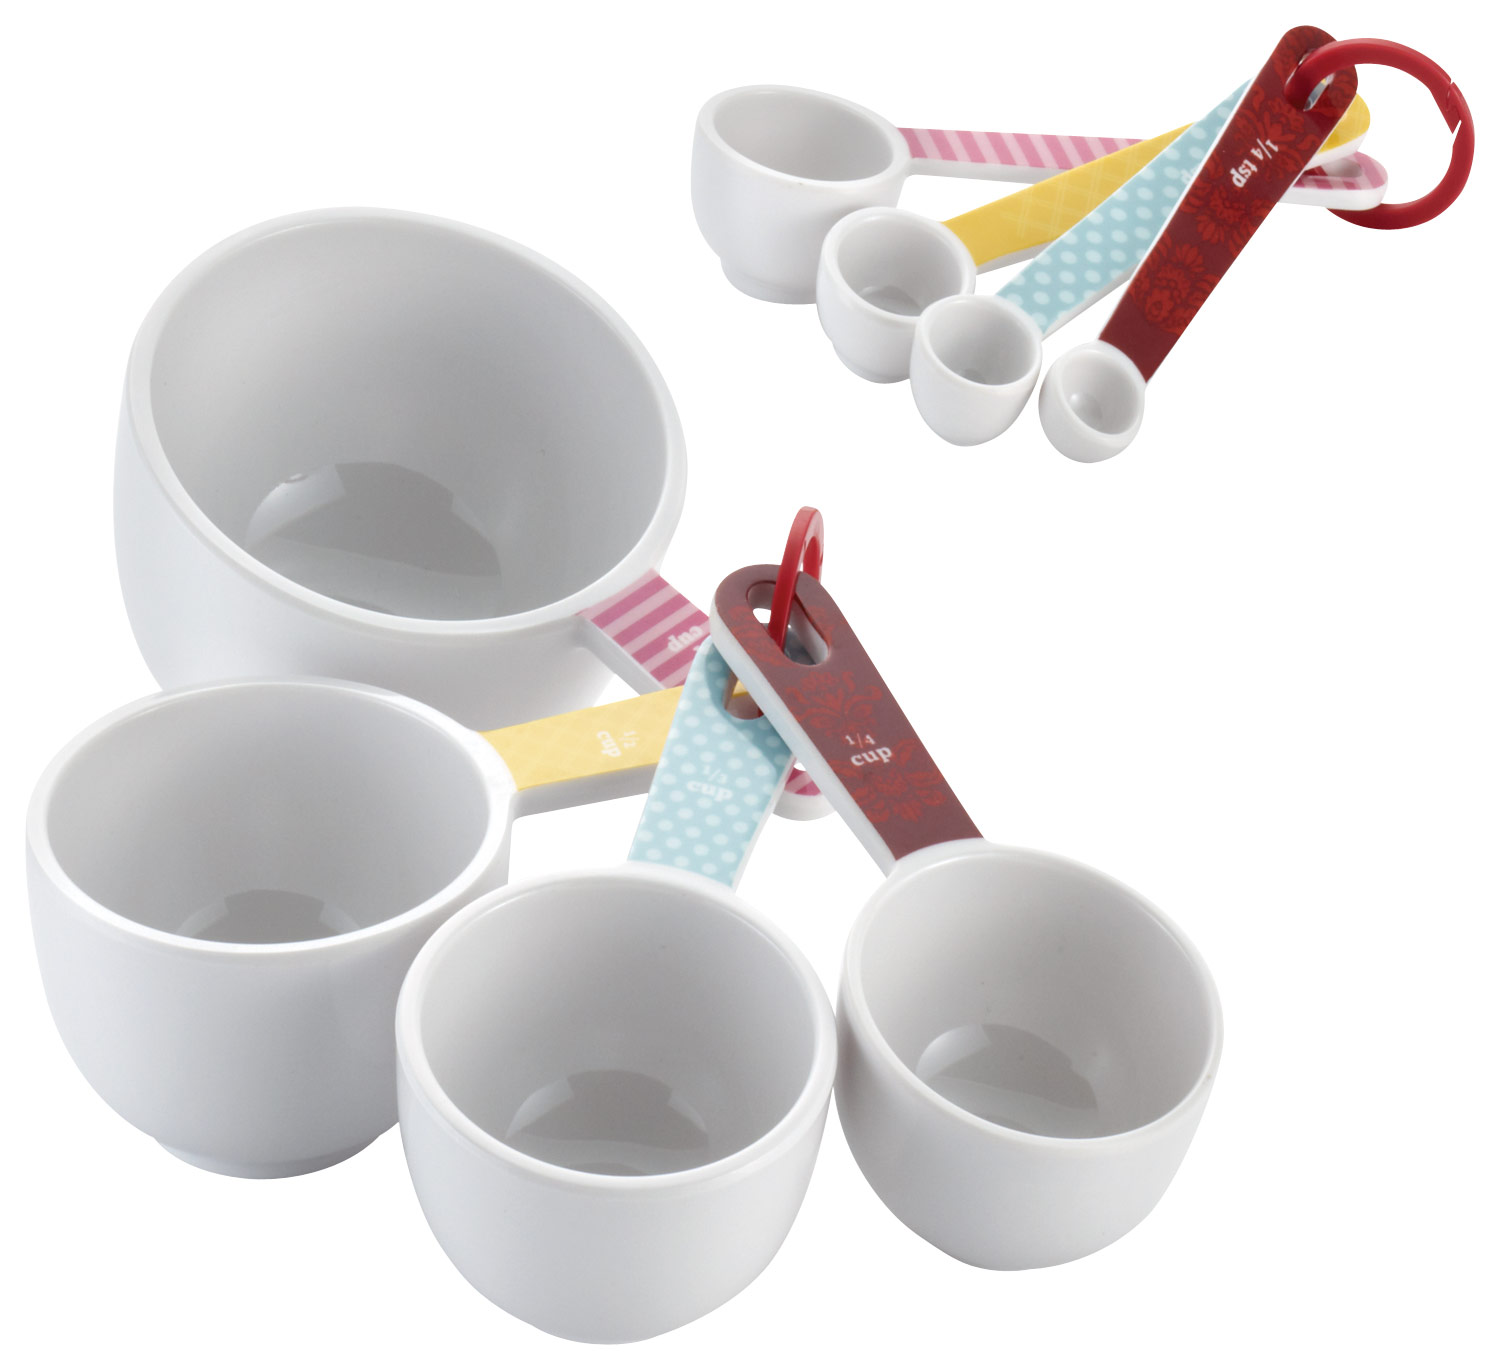 8 Piece Set of Chefmate White Plastic Measuring Cups & Spoons Starter Set